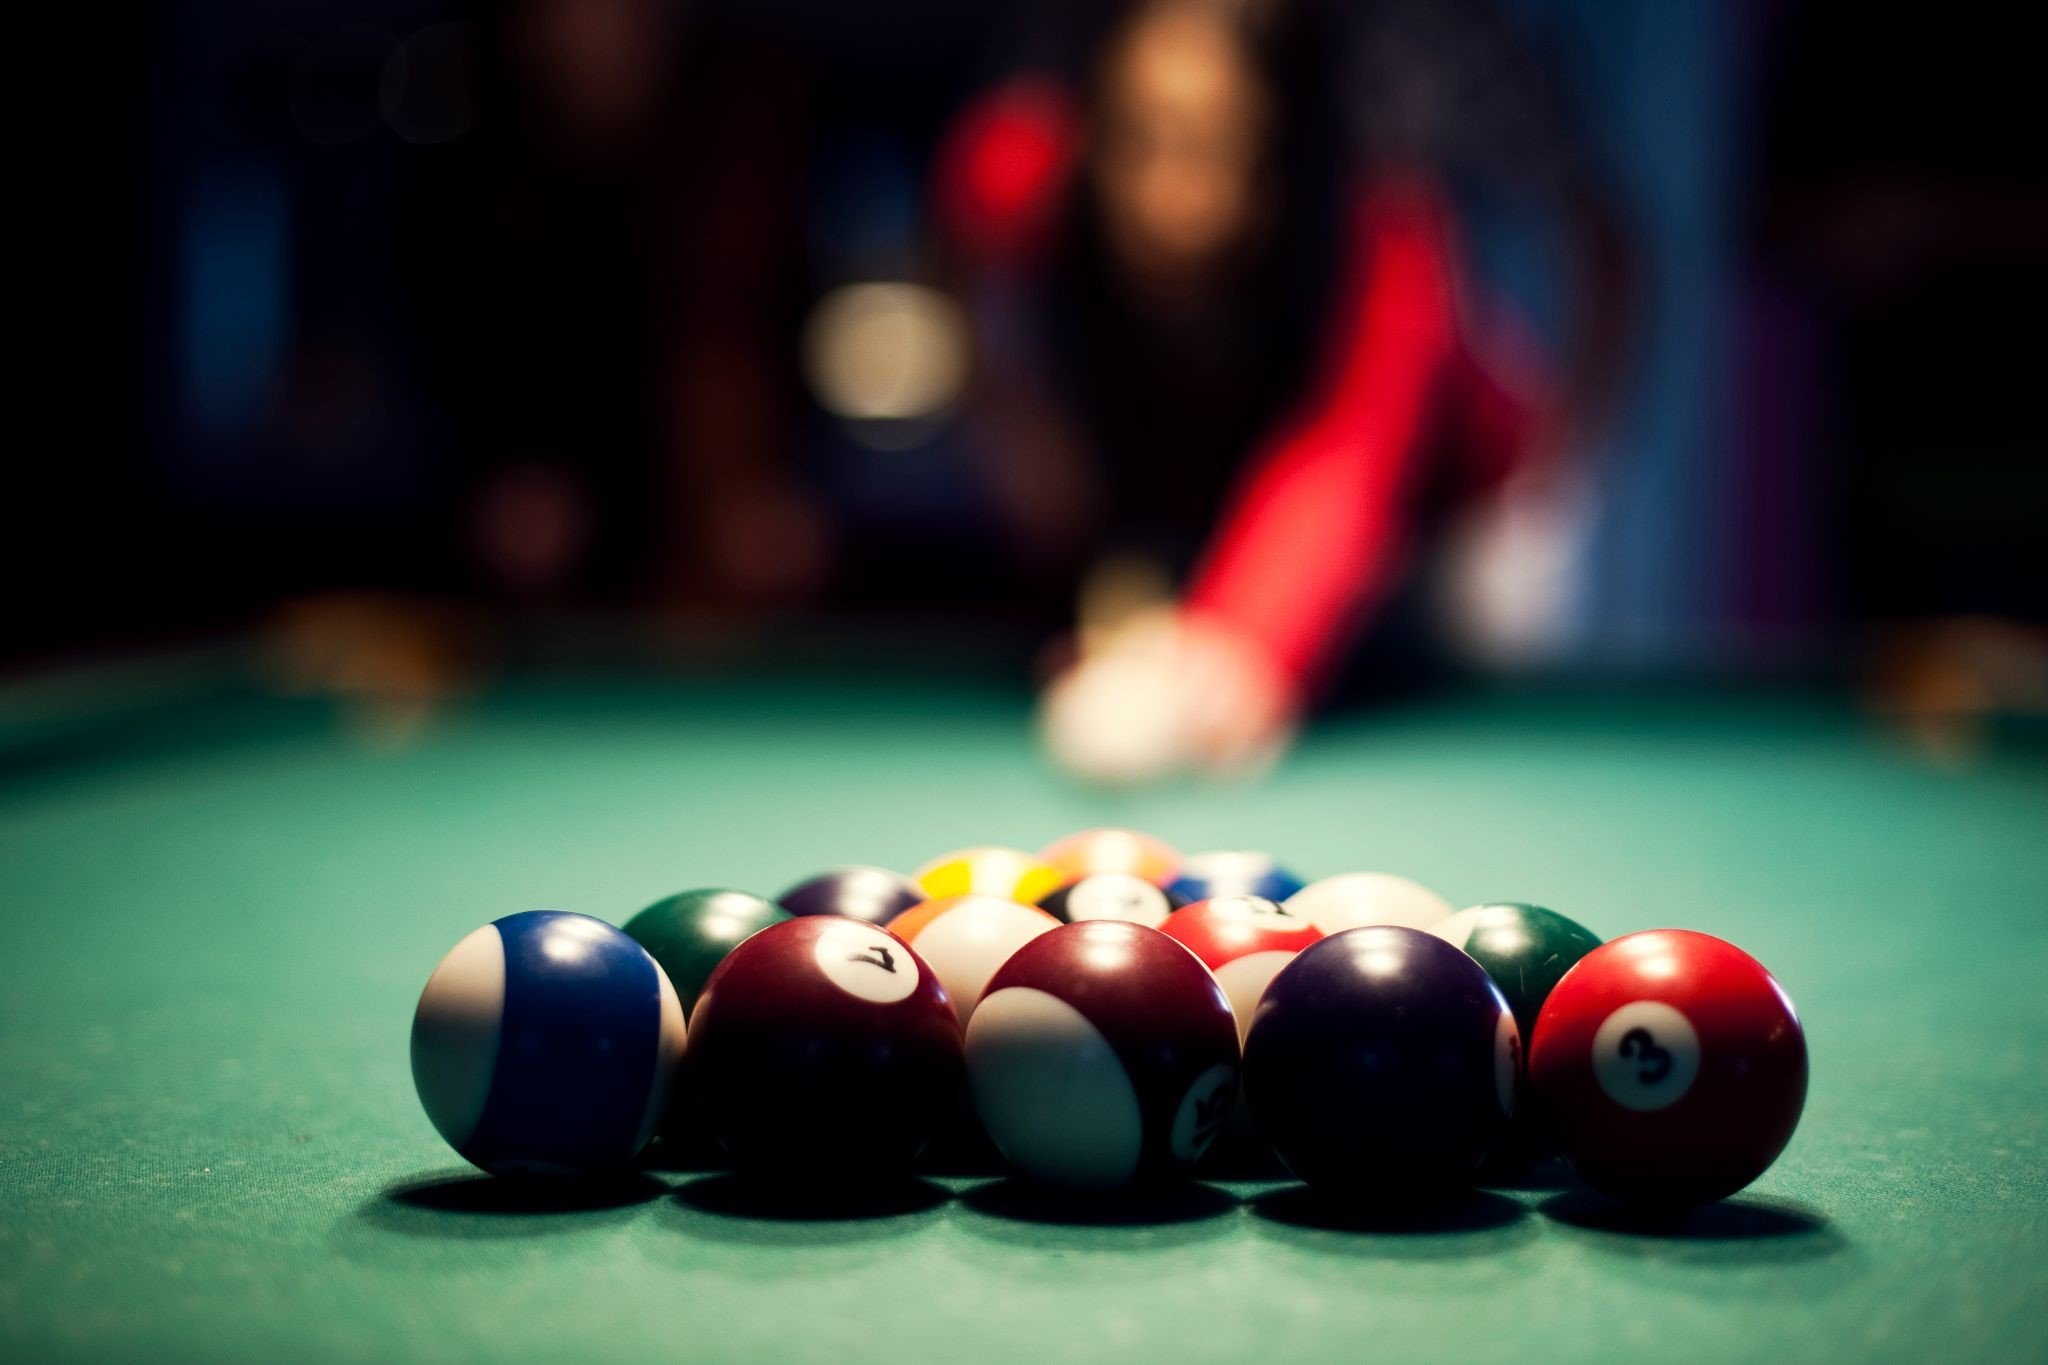 8 Ball Pool Everything You Need to Know